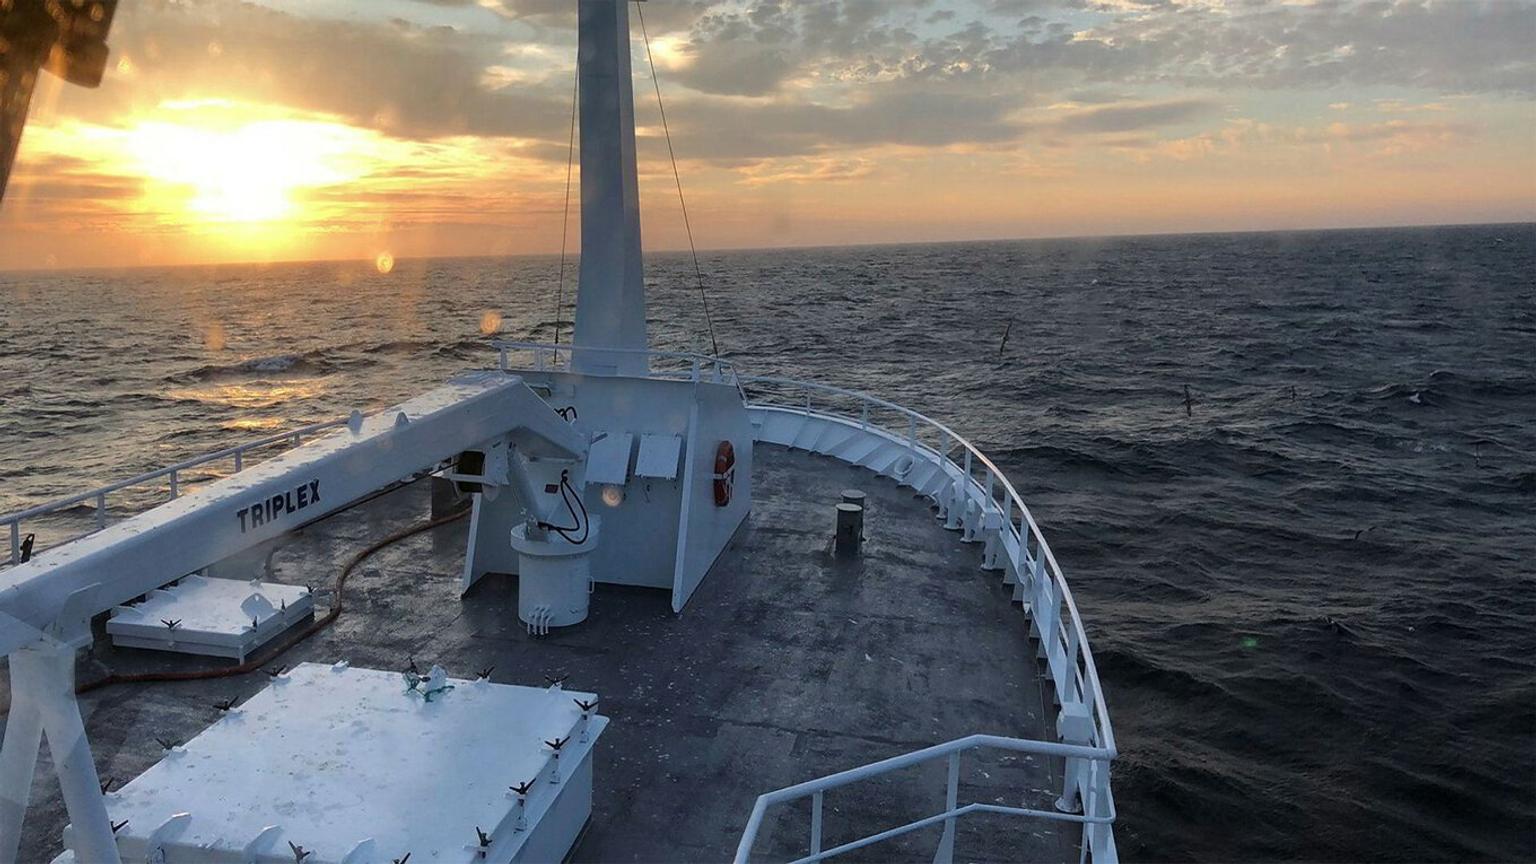 Front of ship in sunset